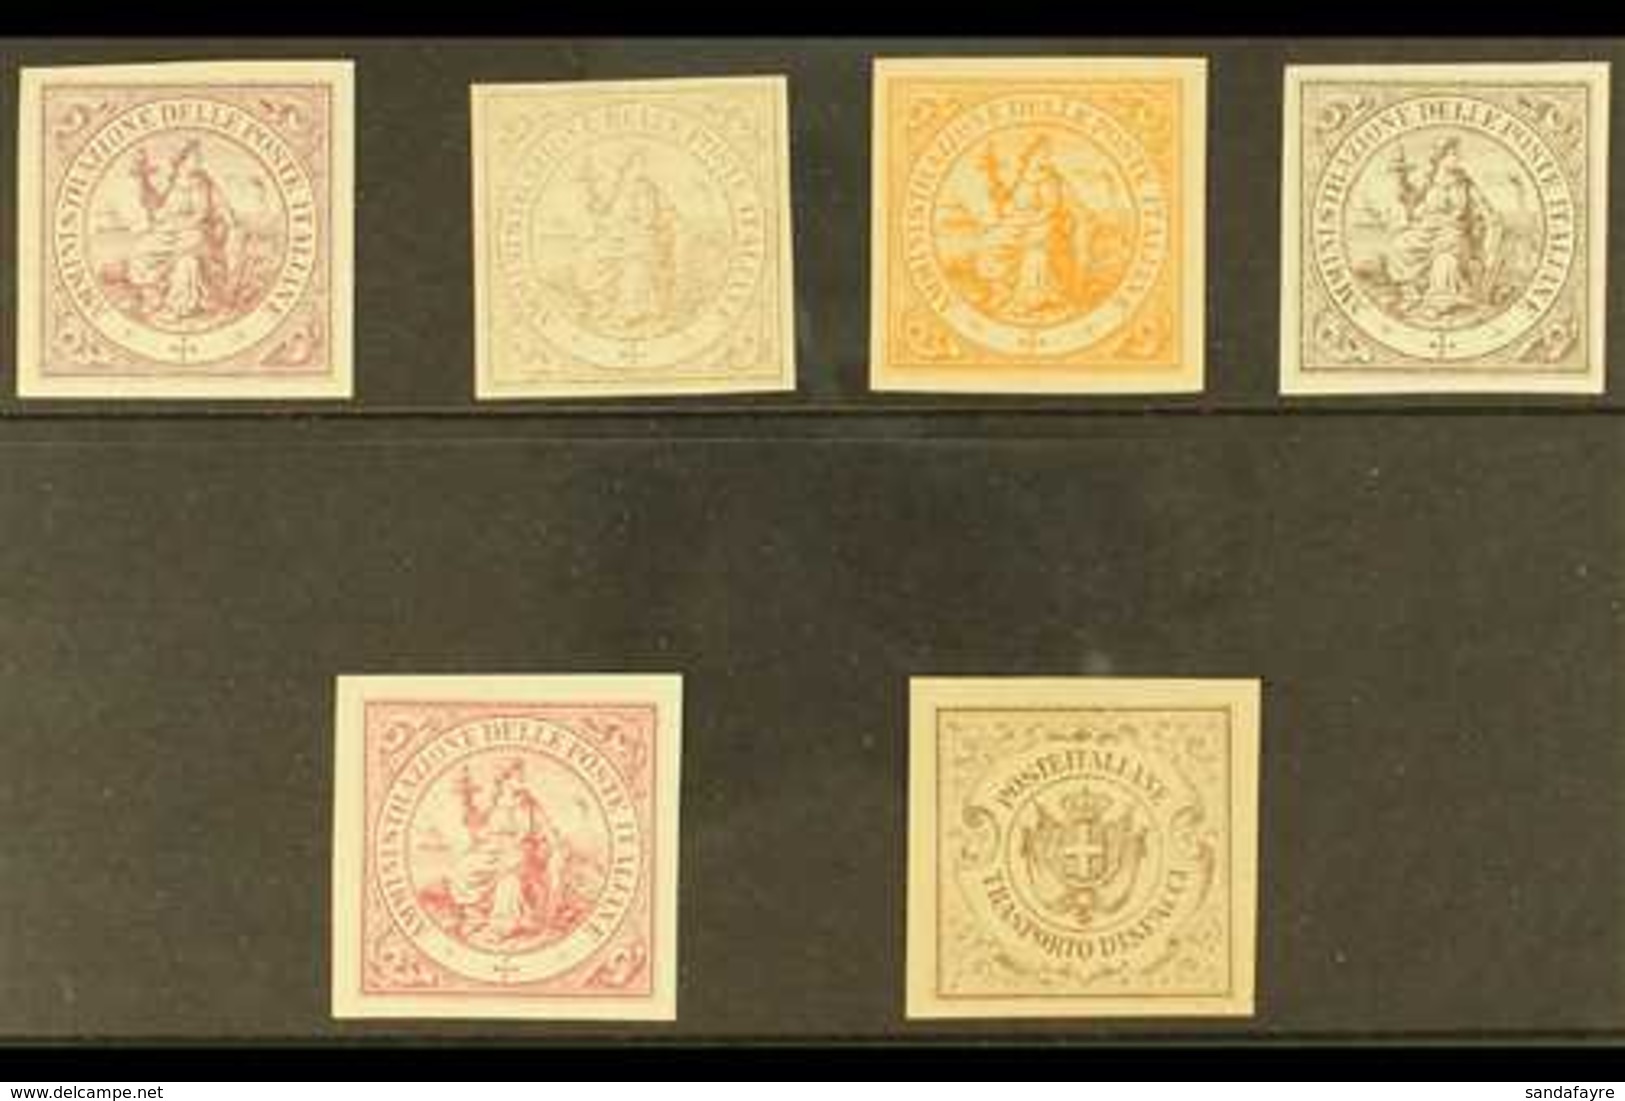 ESSAYS 1864 ITALIAN POSTAL ADMINISTRATION - Five allegorical Designs In Different Colours For "Official Seals" Plus Coat - Unclassified